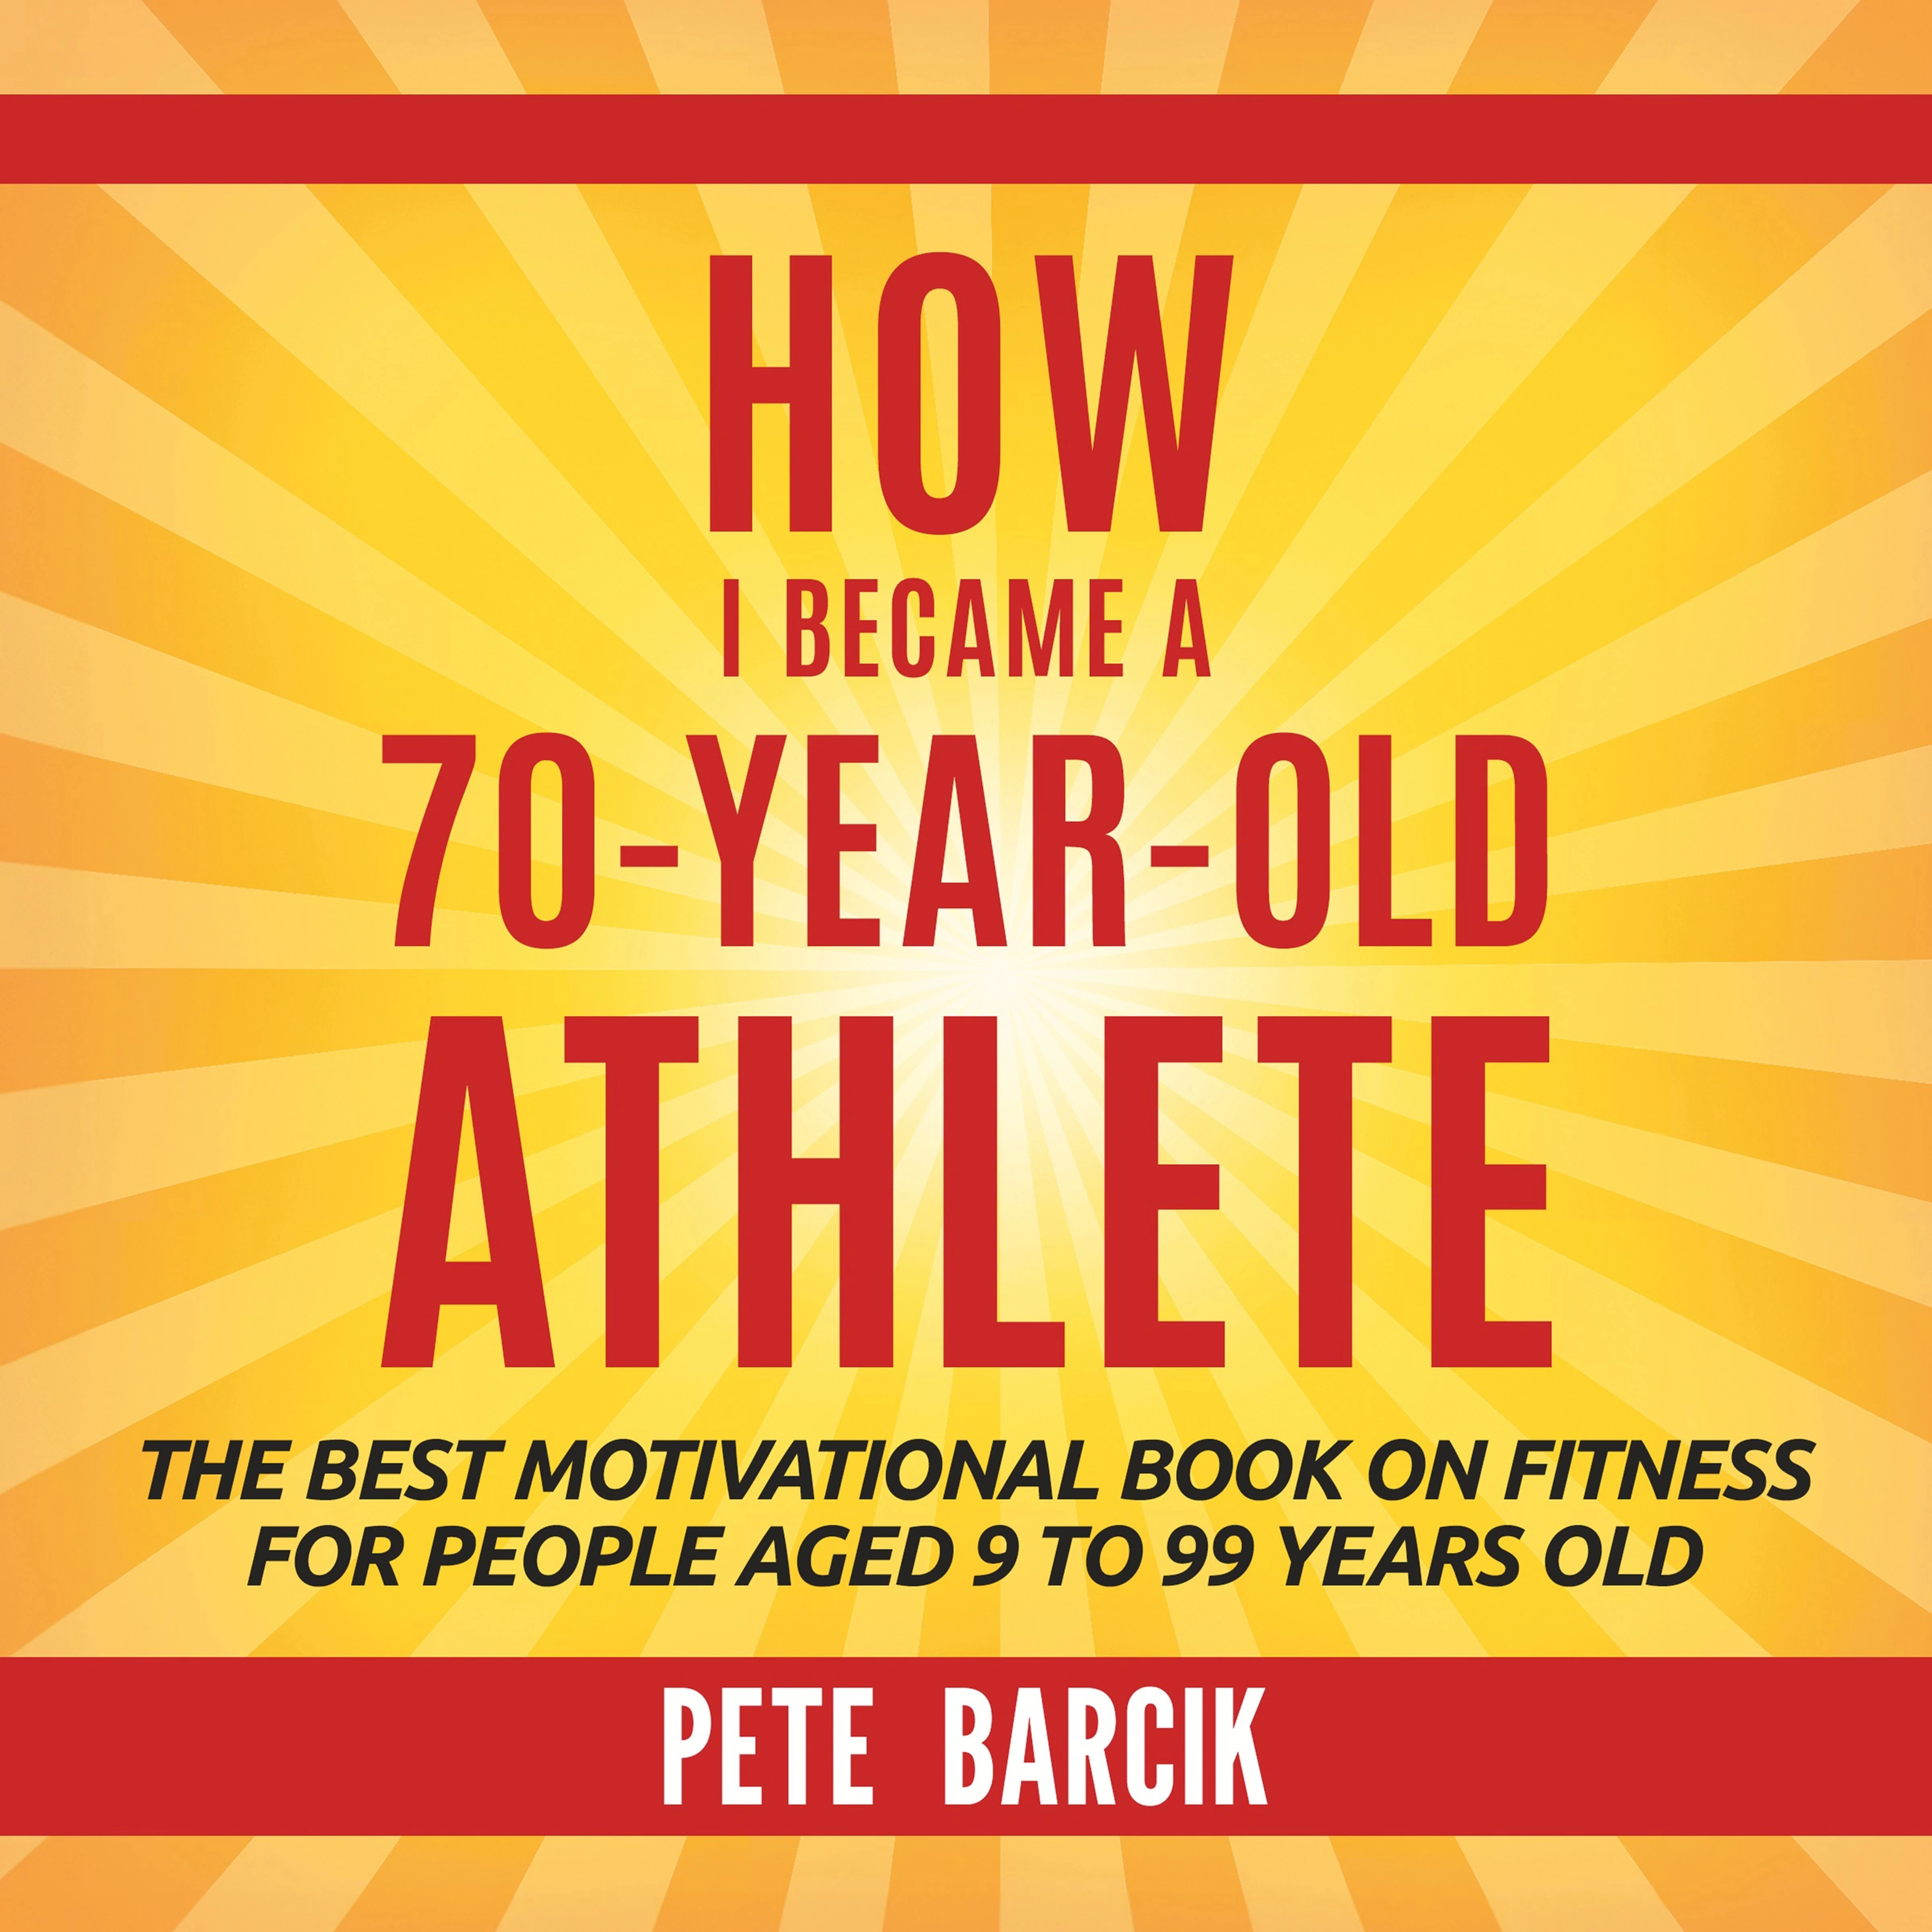 How I Became a 70 yr old Athlete by Pete Barciik Audiobook